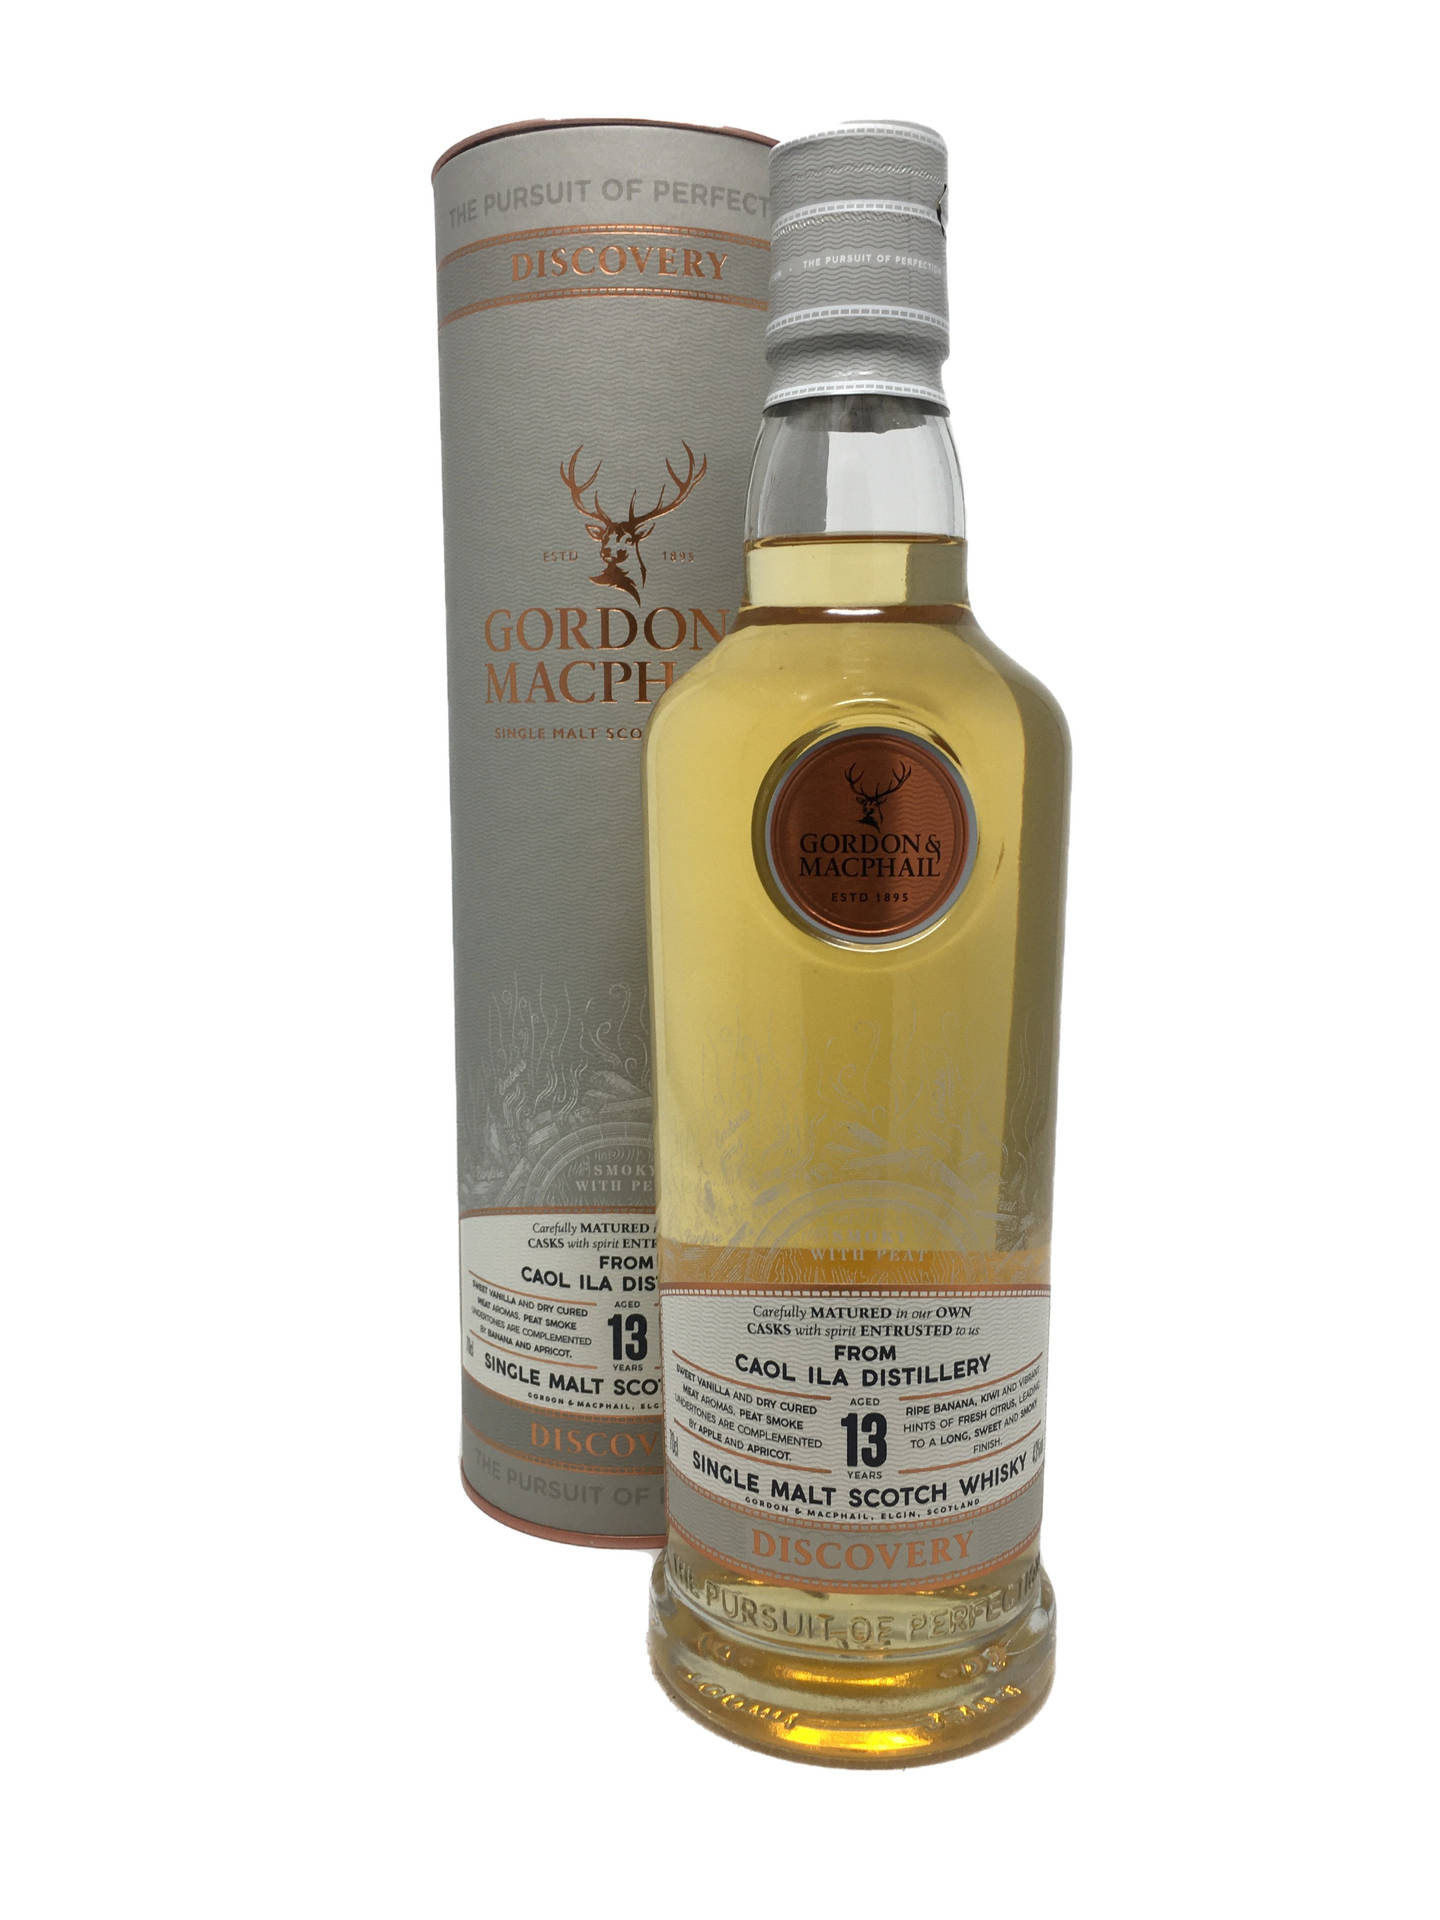 Exquisite bottle of Caol Ila Gordon and MacPhail Scotch Whisky Wallpaper